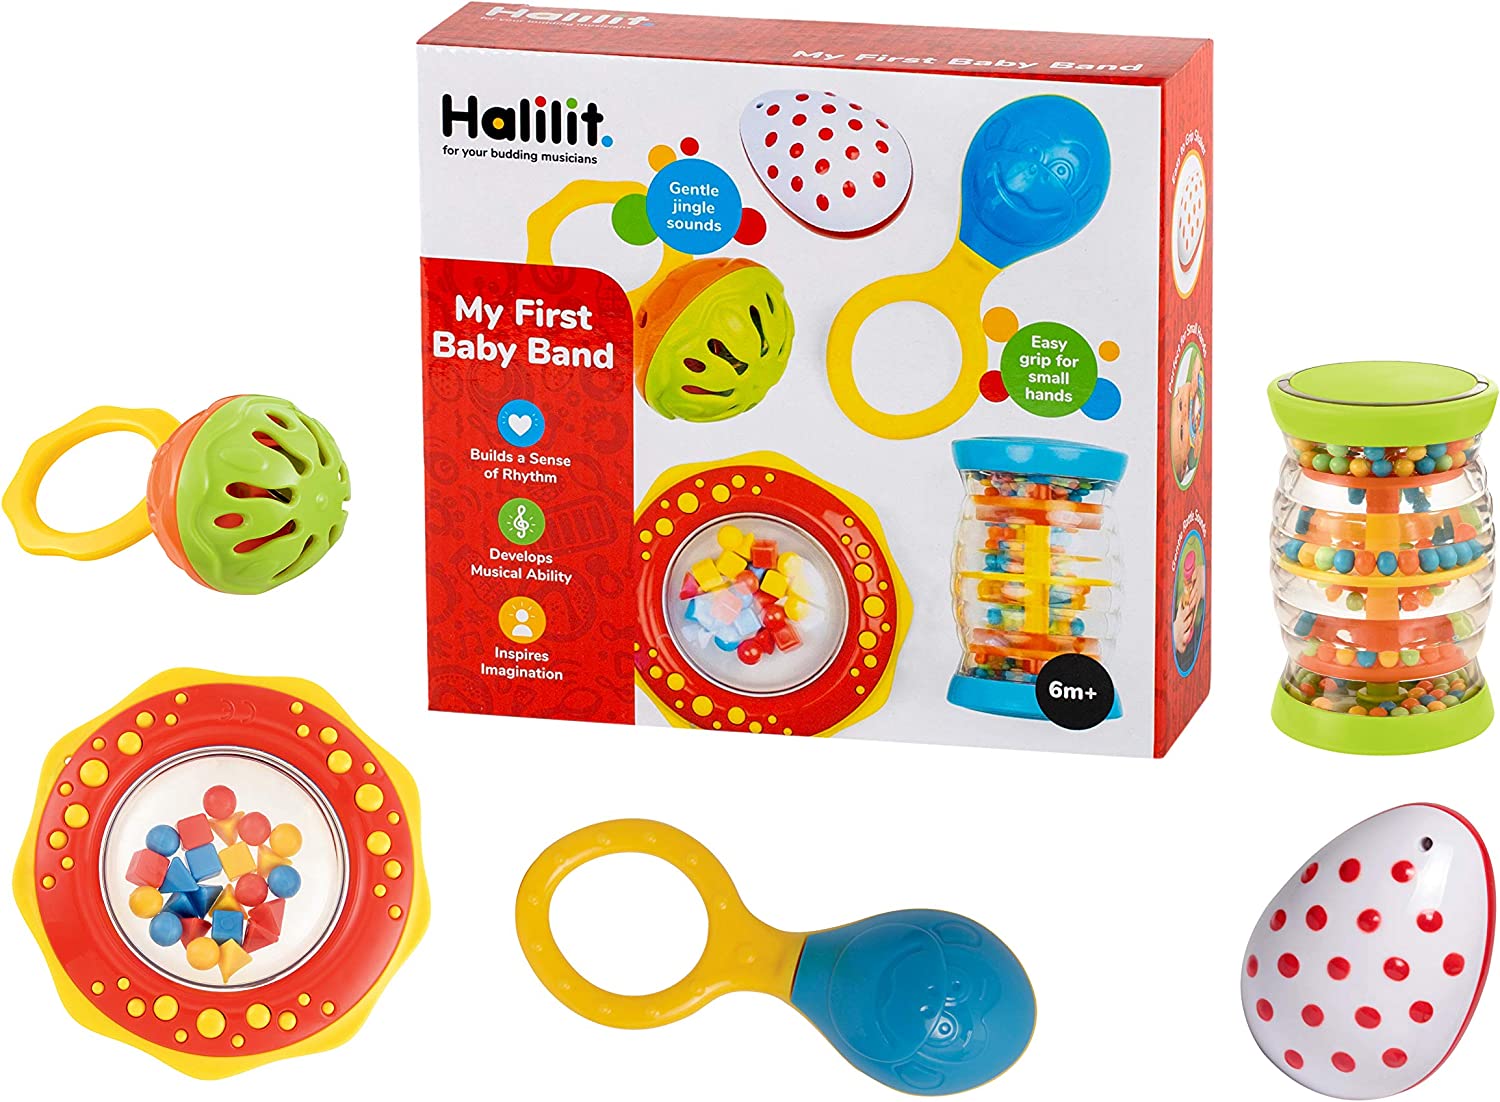 Halilit My First Baby Band, The Halilit My First Baby Band is the ultimate starter pack for introducing your little one to the enchanting world of music. Thoughtfully designed and packaged, this Halilit My First Baby Band gift set makes for an ideal present for a baby's first birthday. Halilit My First Baby Band Features: Diverse Instrumentation: The set includes an Ocean Drum, Baby Maraca, Ring My Bell, Rainboshaker, and Clip Clap, offering a varied sensory experience. High-Quality Construction: Known for 